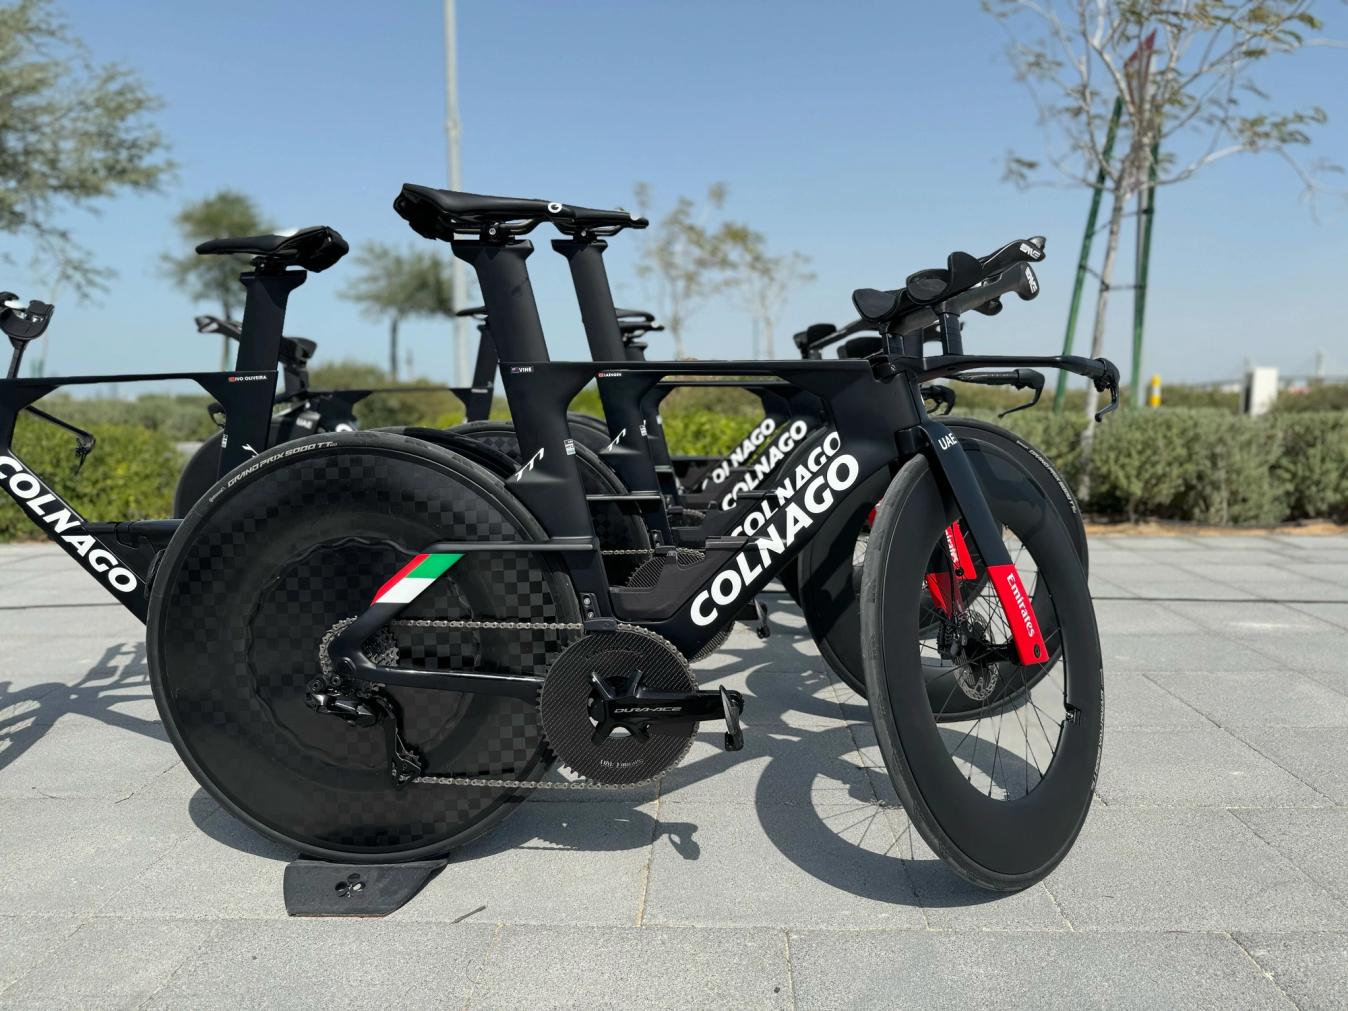 It powered Colnago’s aptly named TT1 bike, which is heading into its second full WorldTour season, having officially broken cover midway through 2022